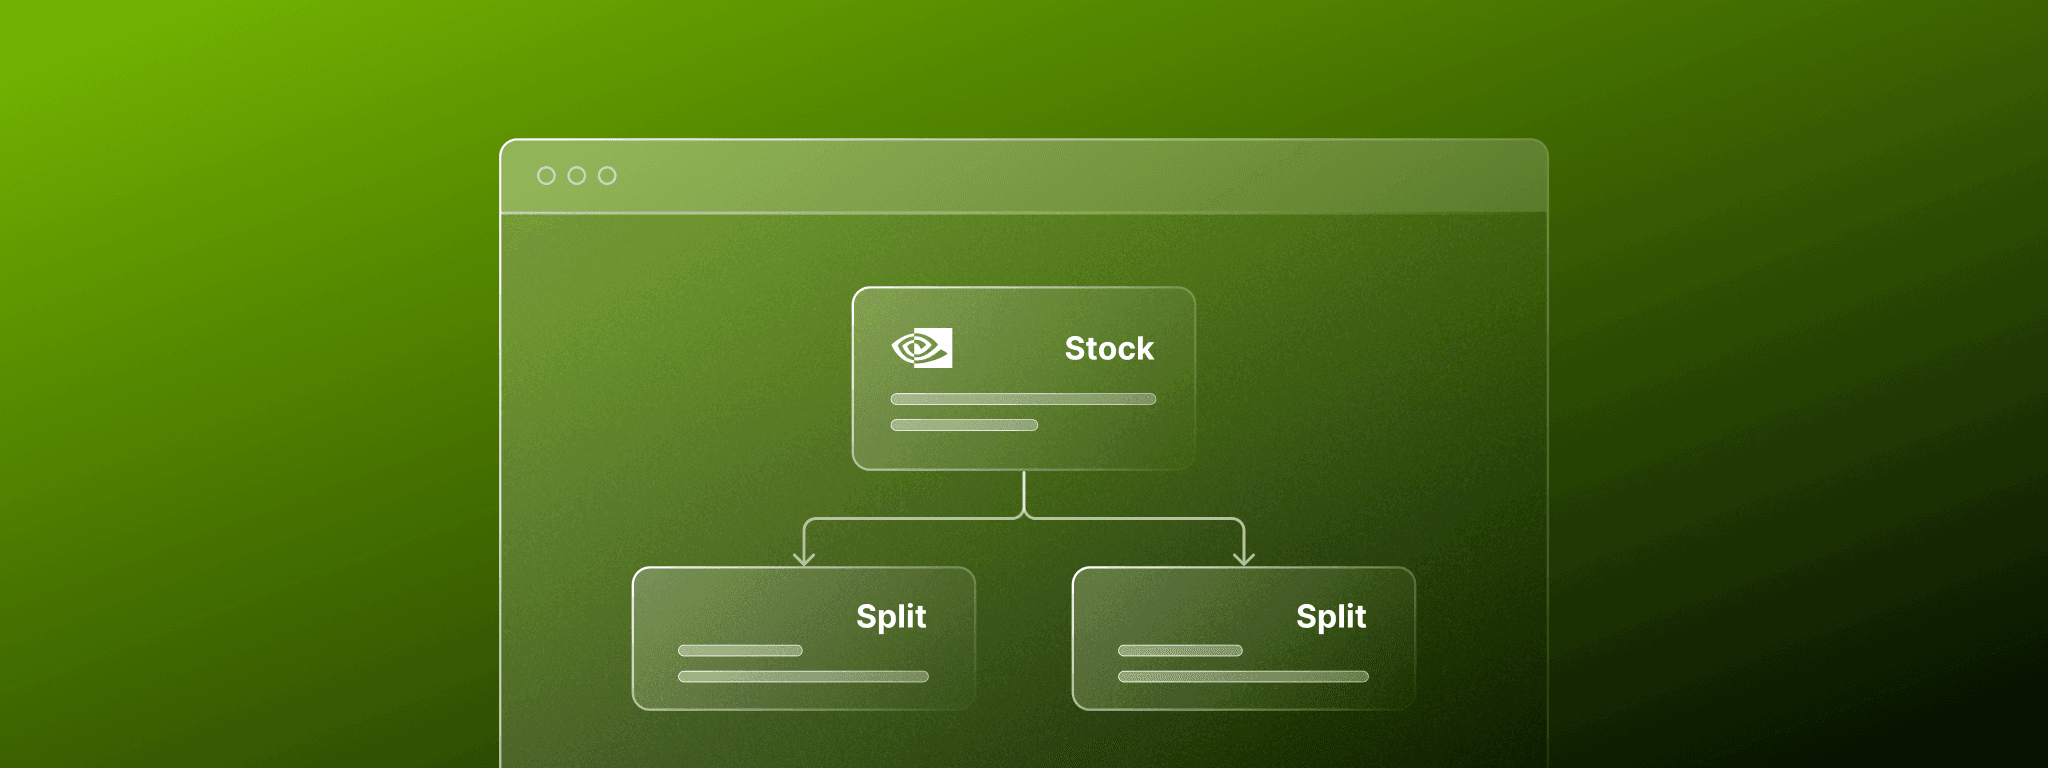 using the split api endpoint to handle the nvidia stock split Feature Image